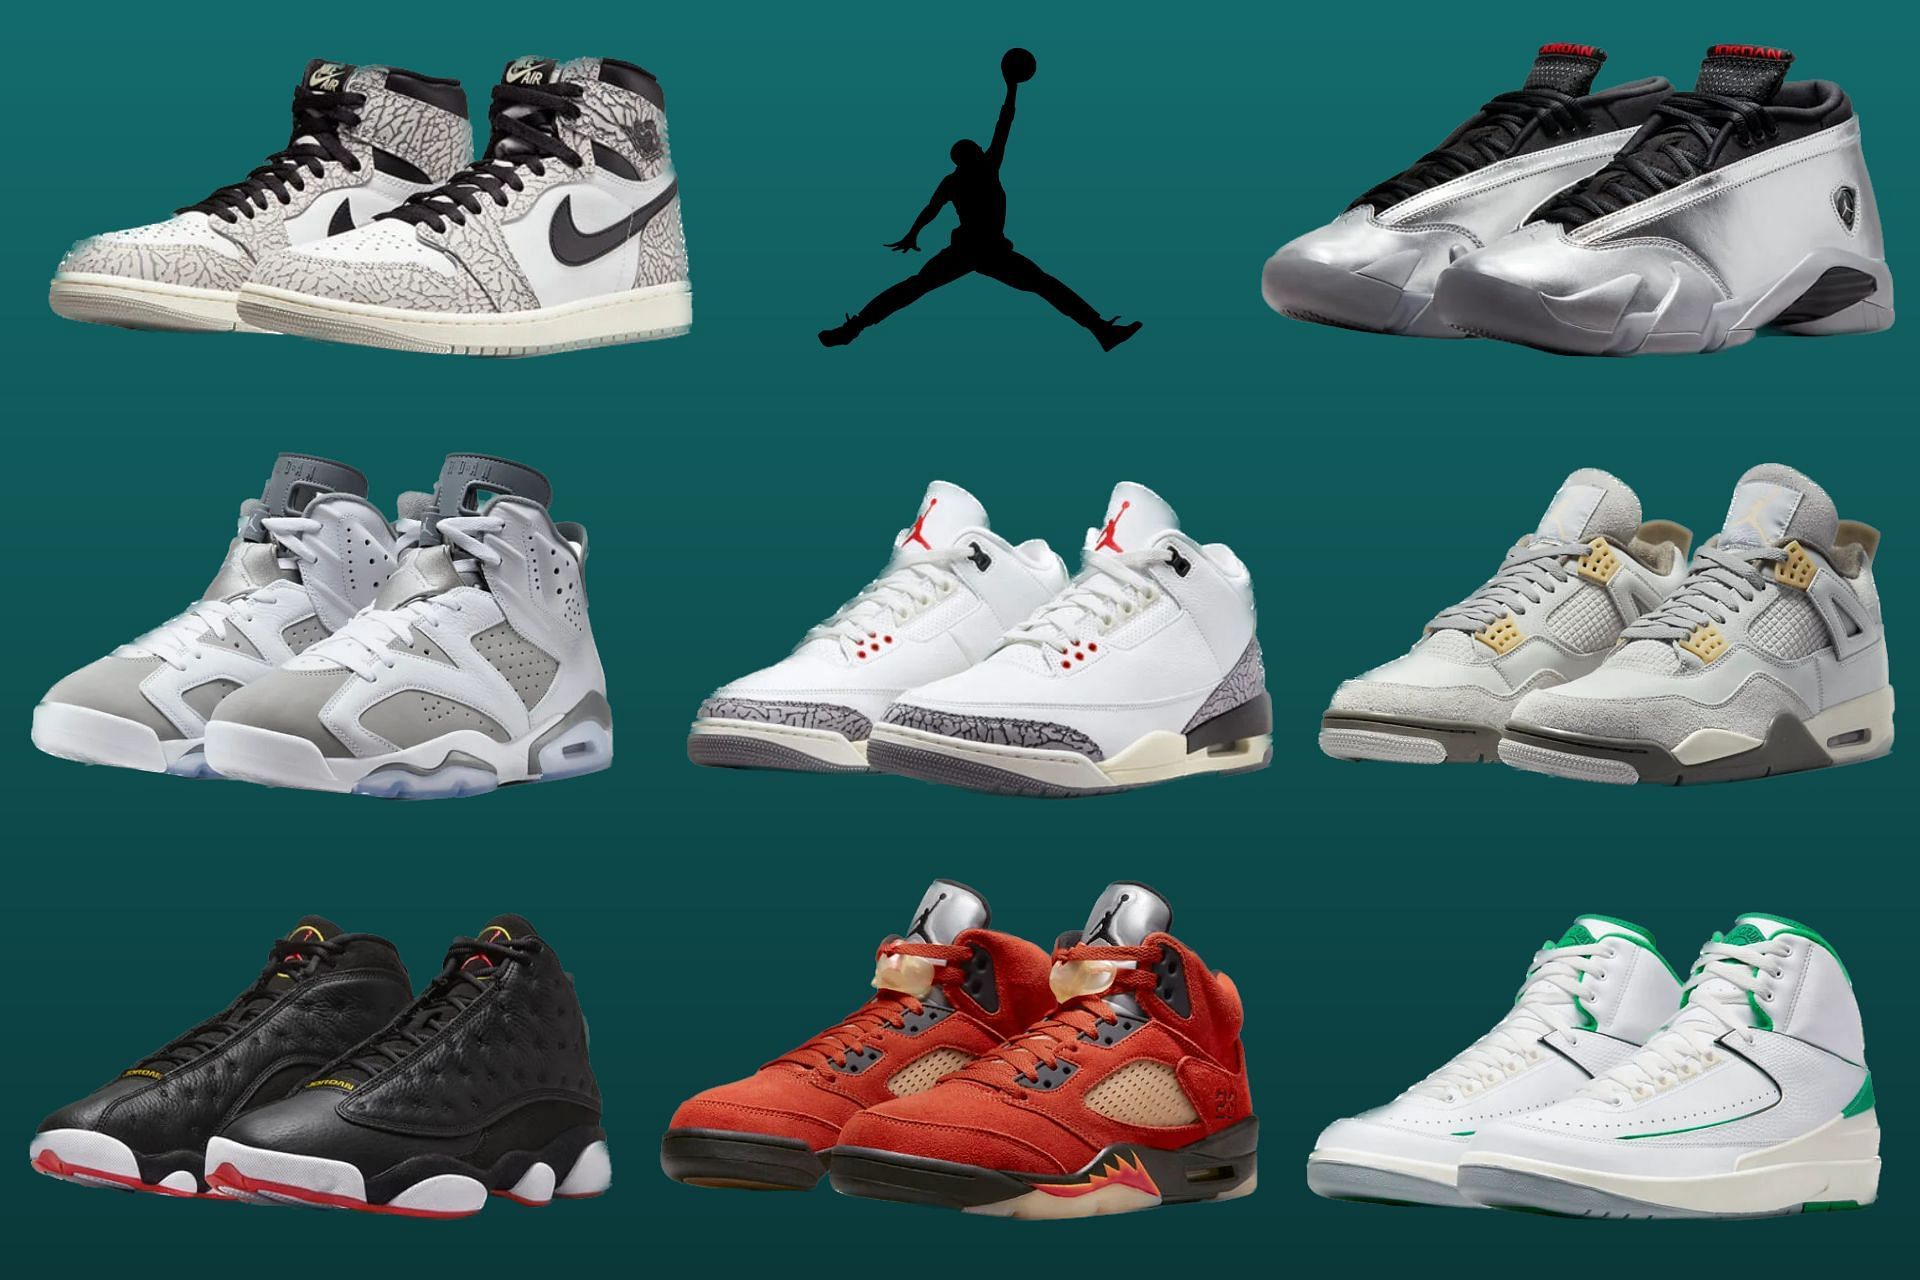 Retro collection: 8 Air Jordan sneaker releases under Retro Collection planned 2023